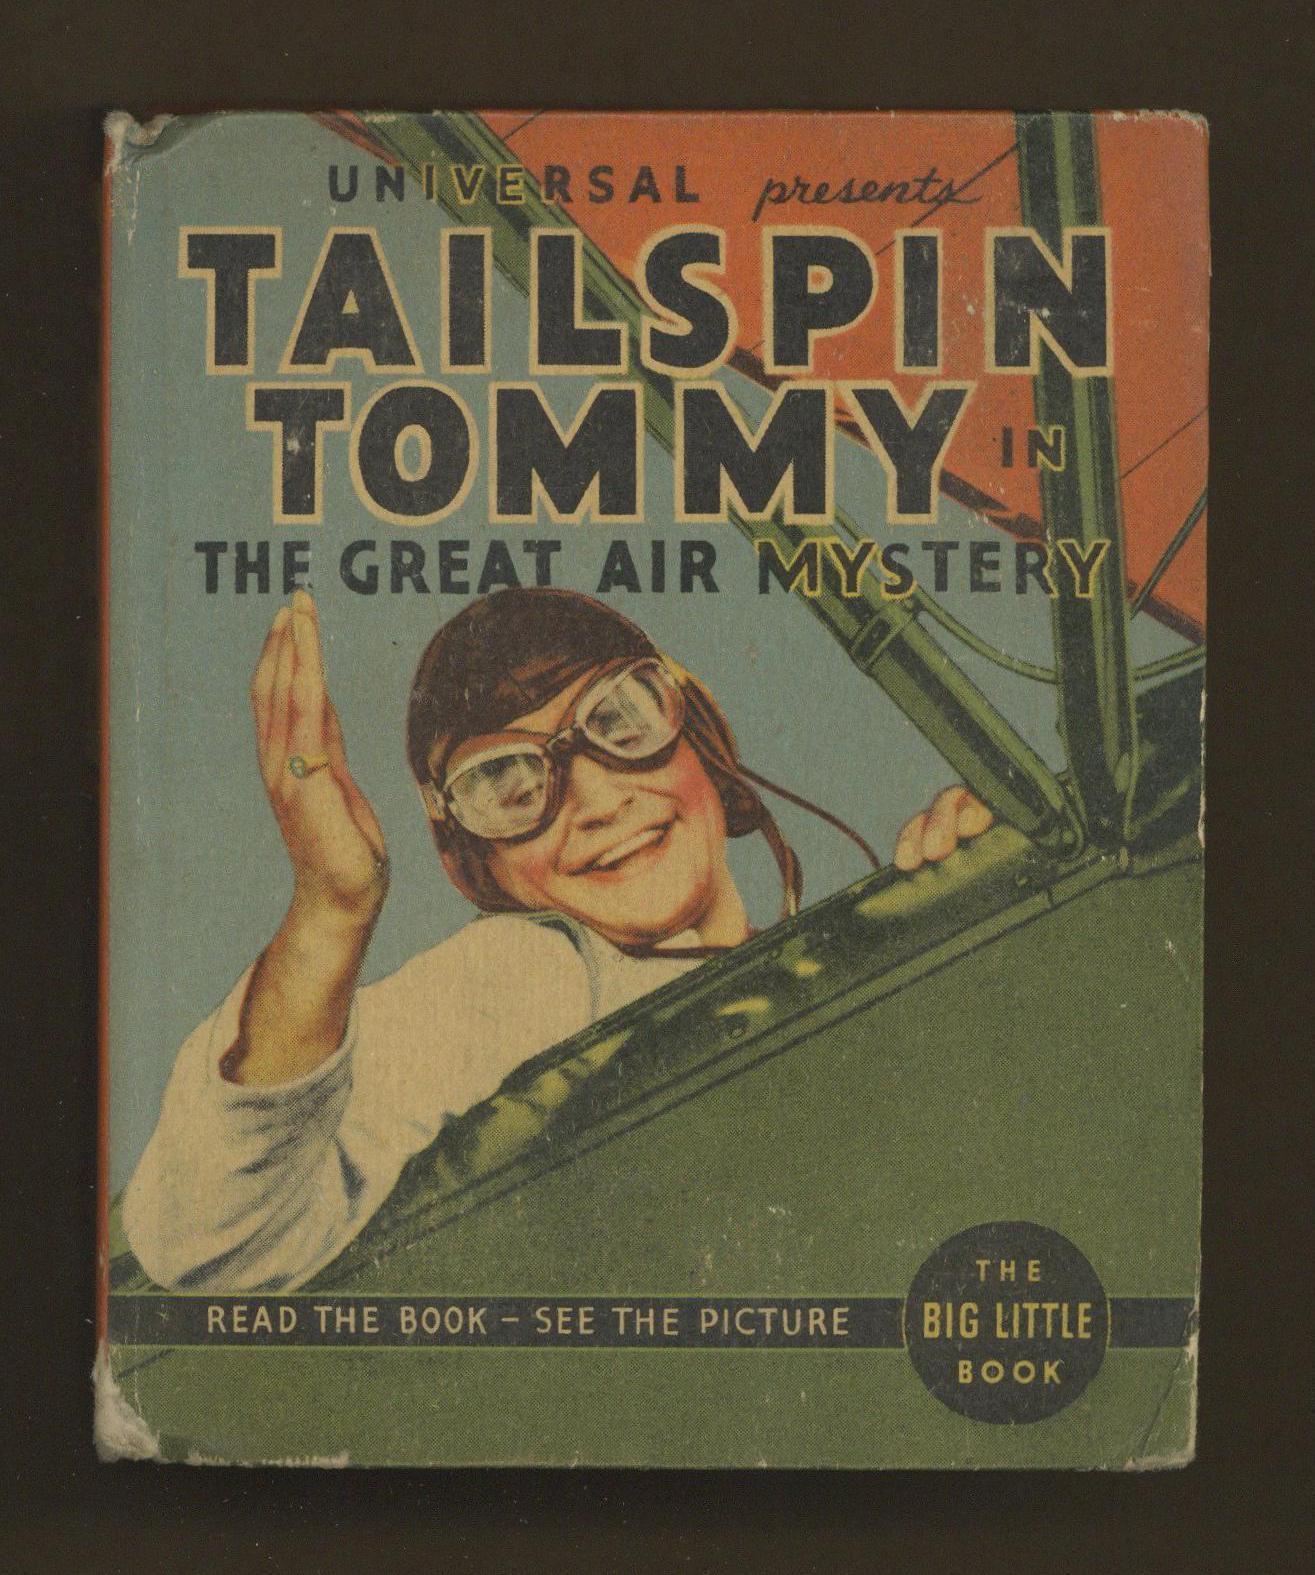 Tailspin Tommy in the Great Air Mystery #1184 VG/FN 5.0 1936 Low Grade